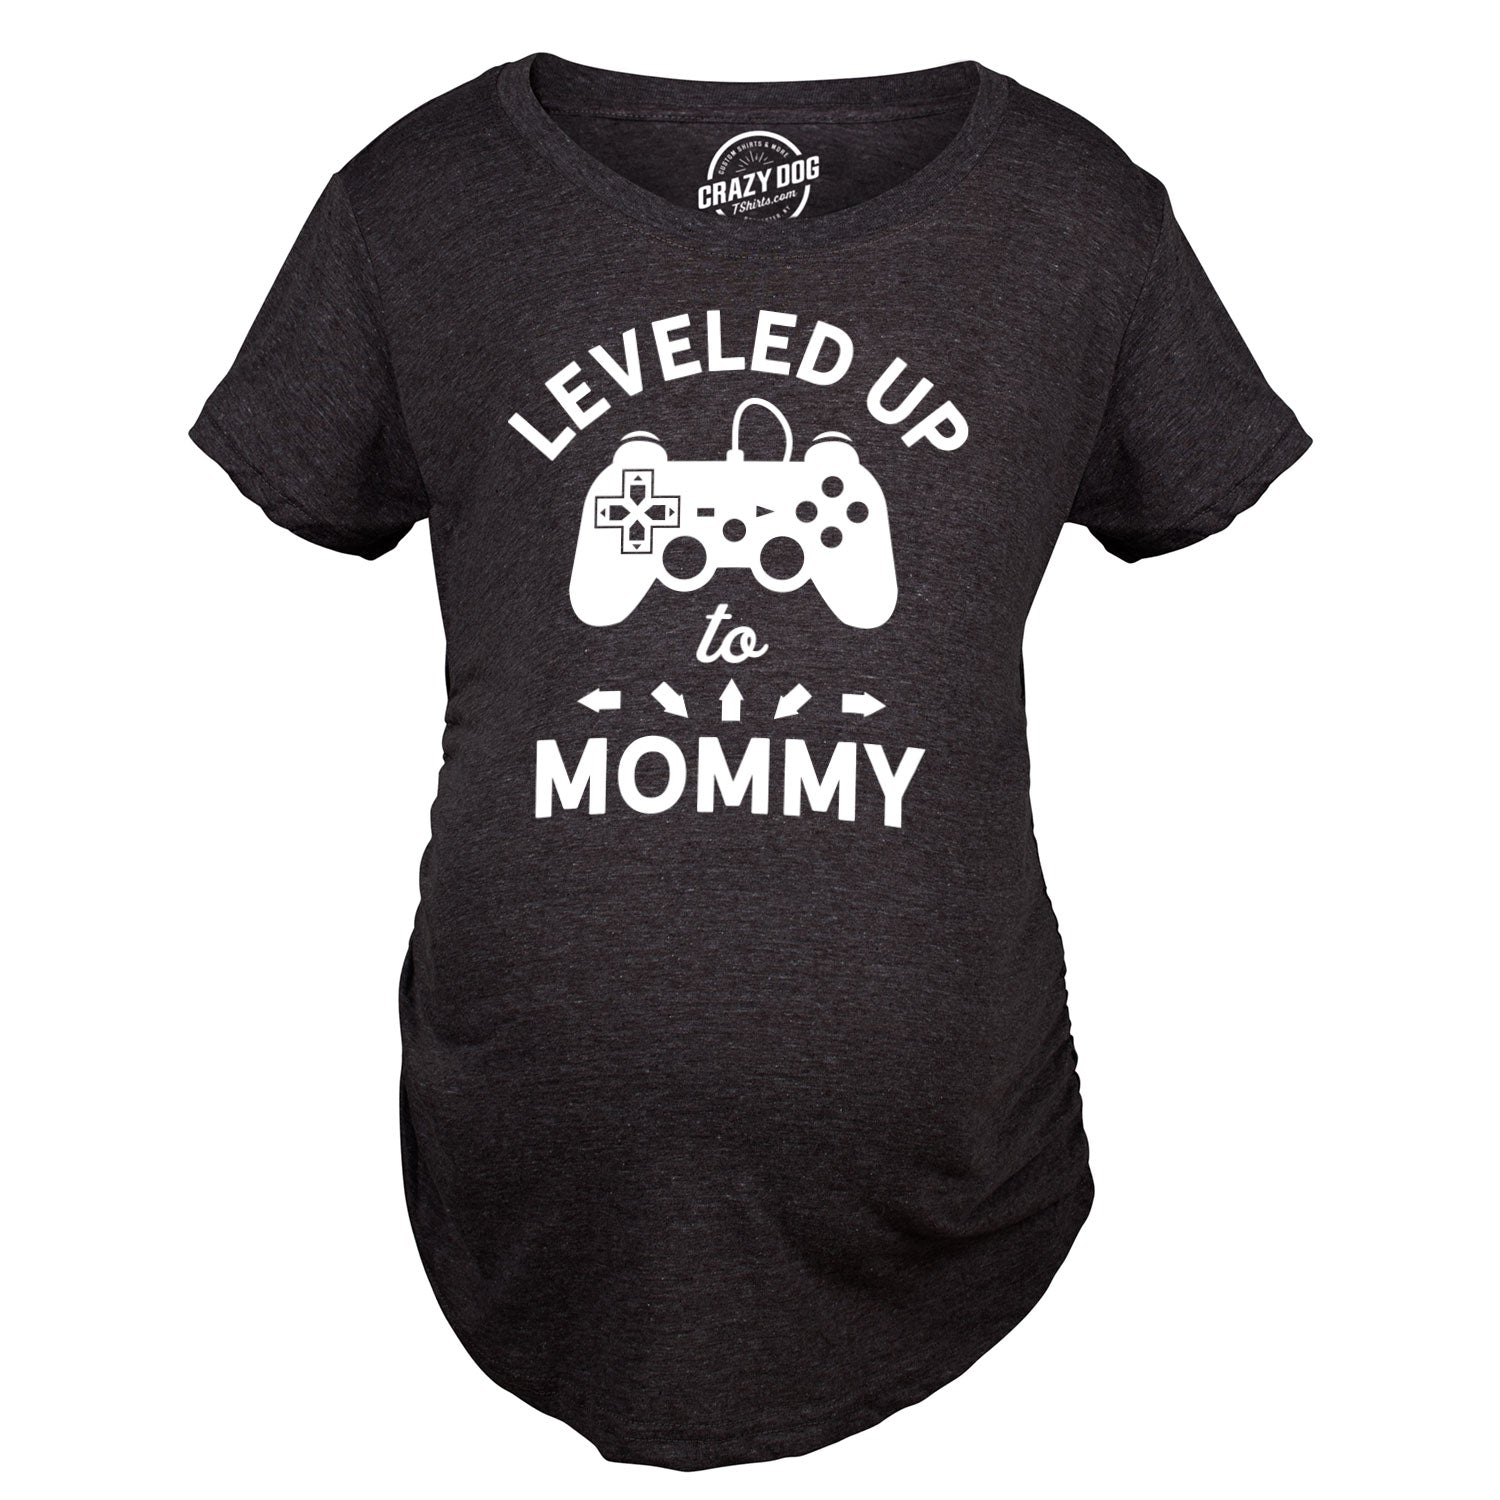 Funny Heather Black Leveled Up To Mommy Maternity T Shirt Nerdy Video Games Nerdy Tee